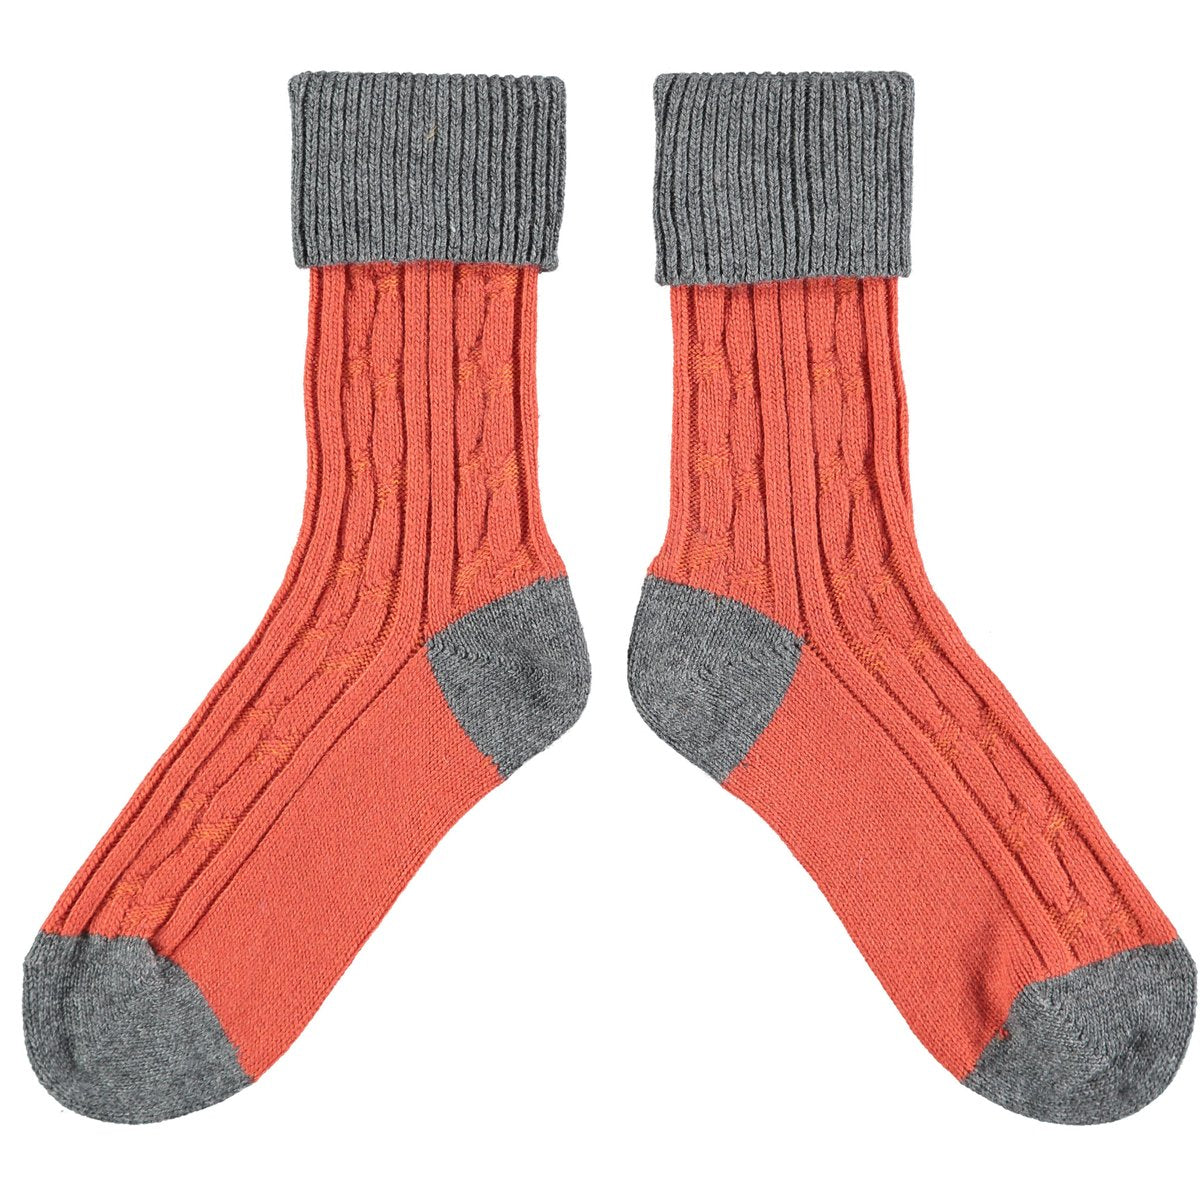 Catherine Tough: Women's Cashmere Mix Slouch Socks in Orange/Grey (Size 8.5-11.5)